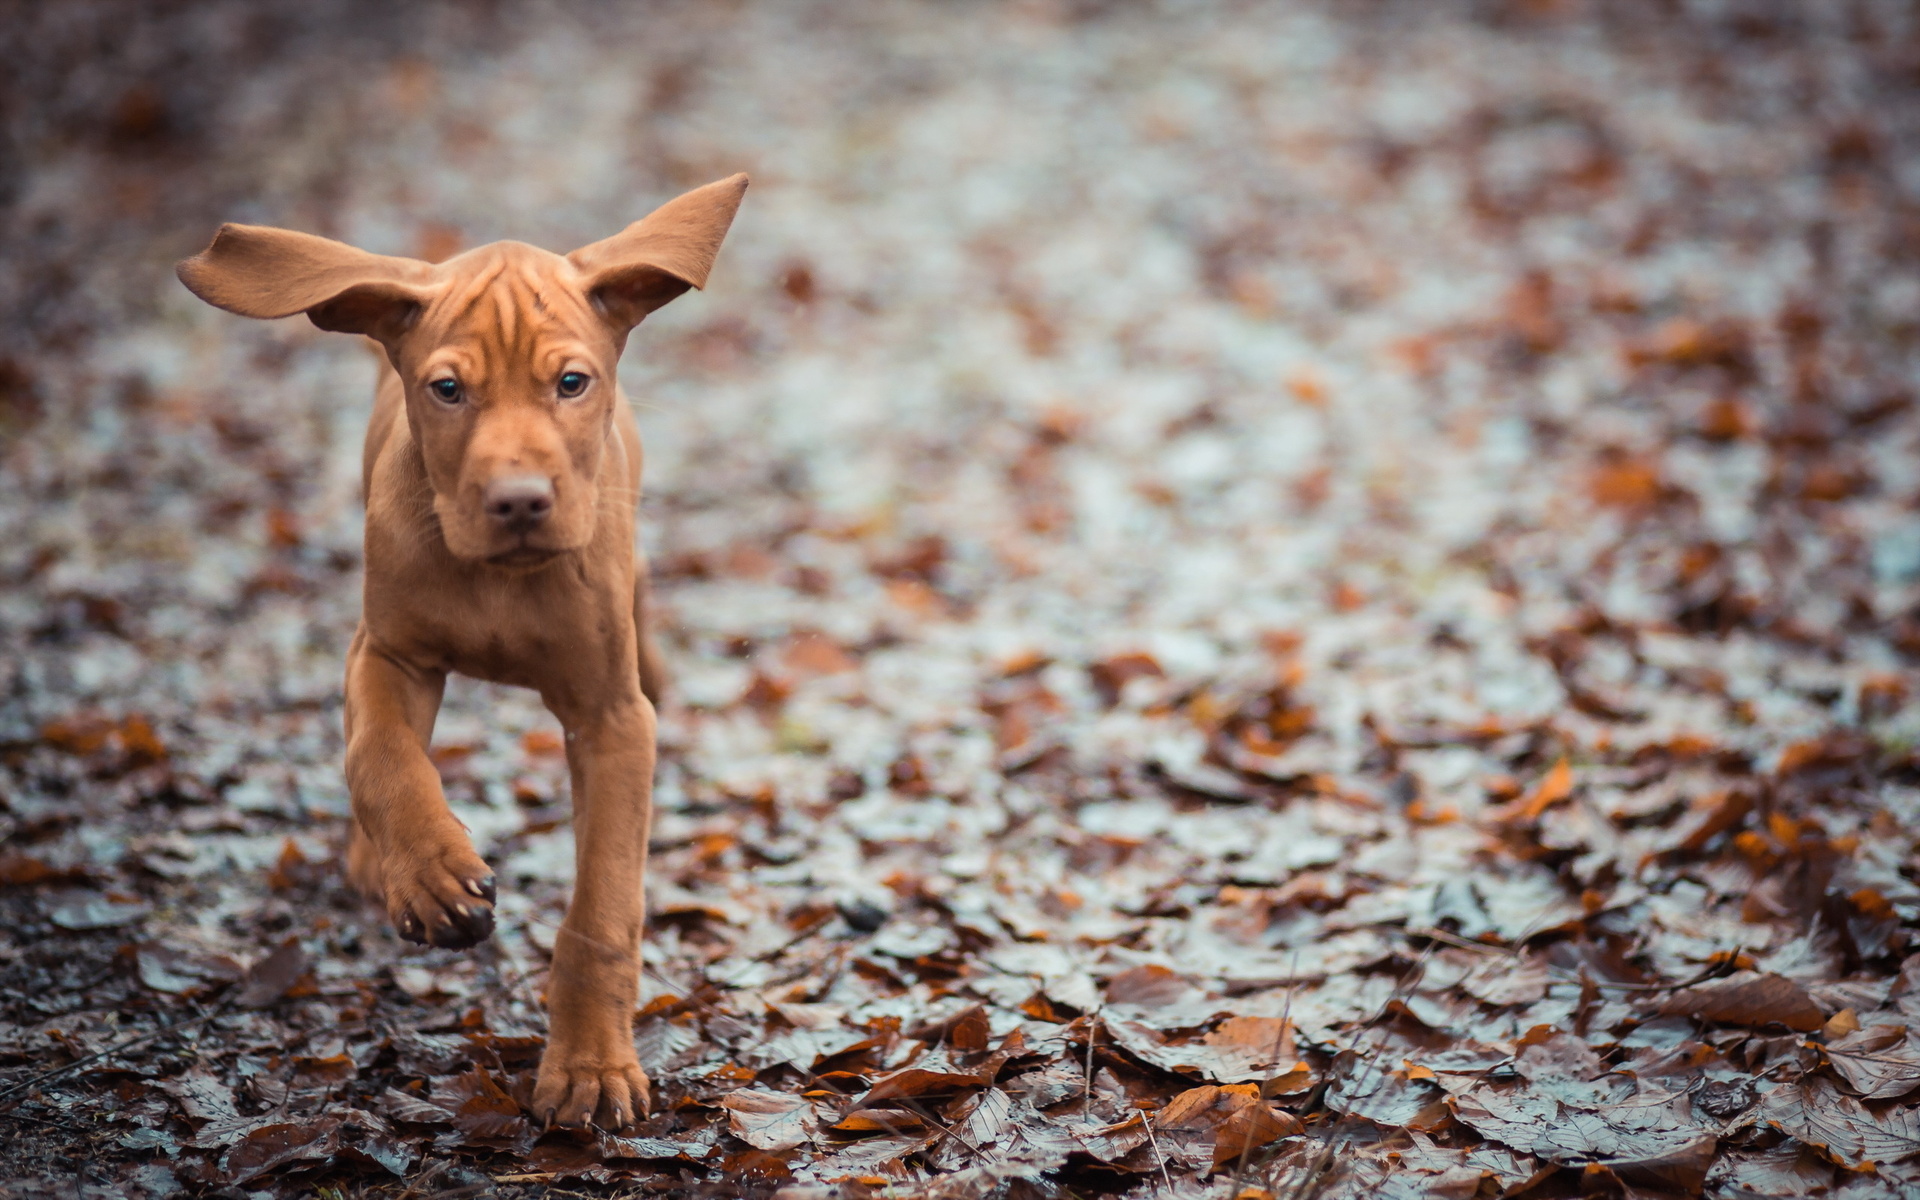 animals, Dogs, Puppy, Canine, Humor, Funny, Cute, Ears, Autumn, Fall, Leaves, Wet, Rain Wallpaper